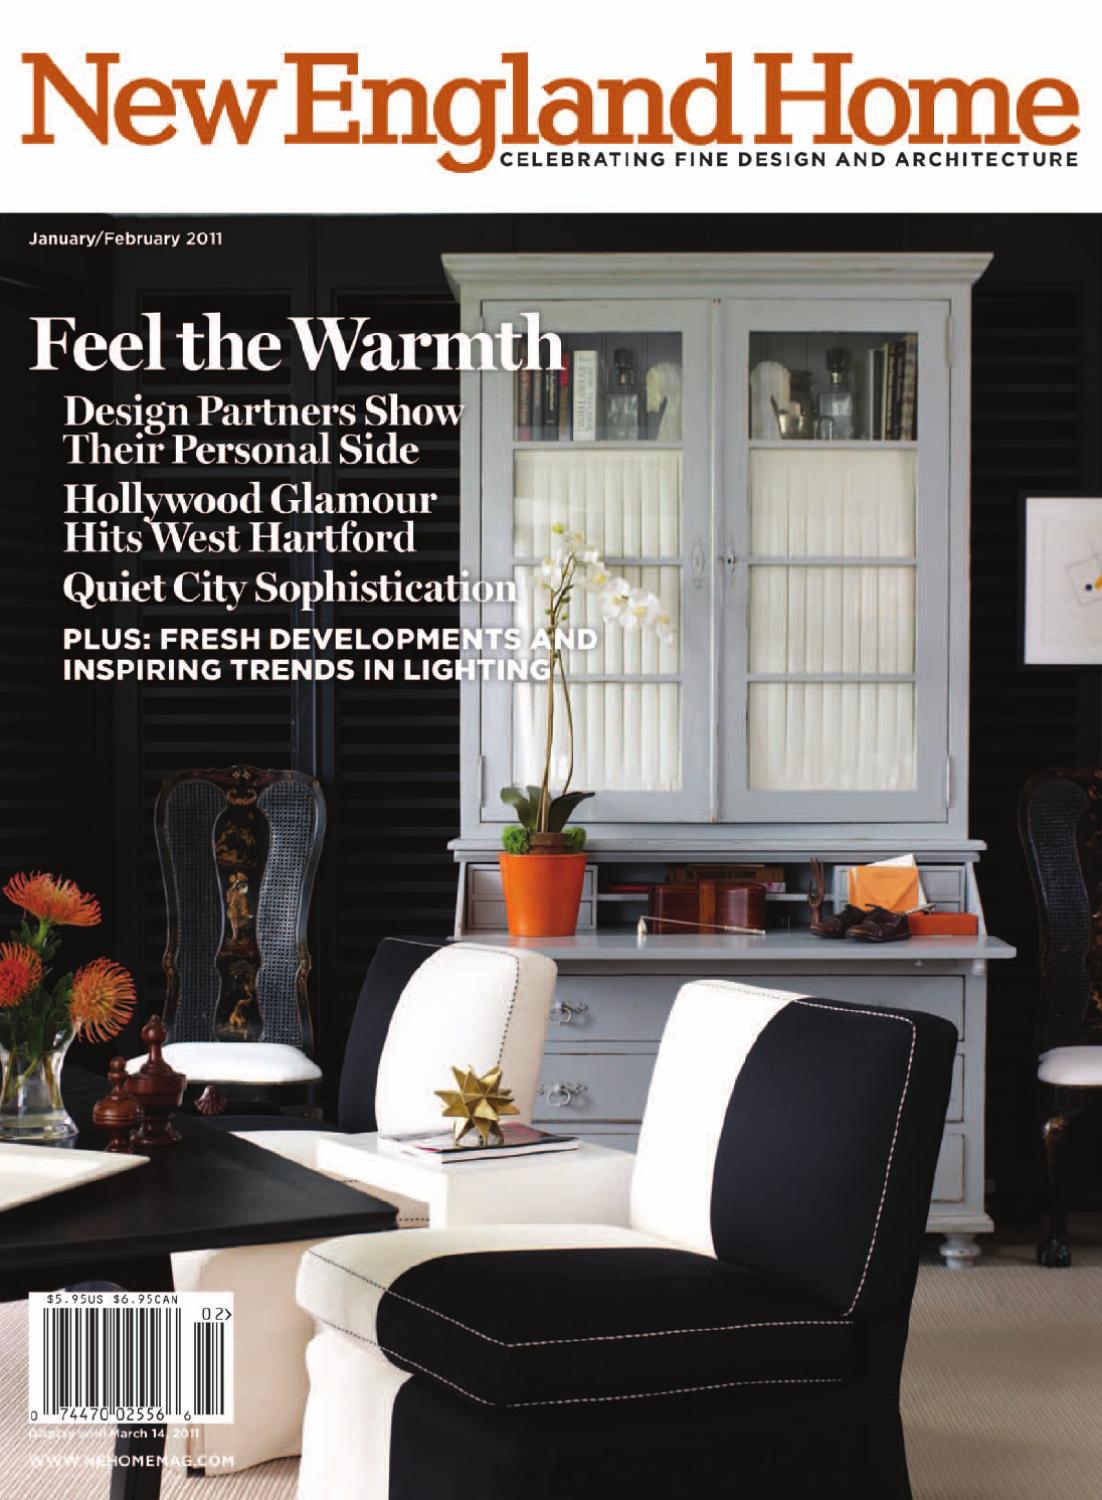 Fauteuil Palette Inspirant New England Home by Network Munications Inc issuu